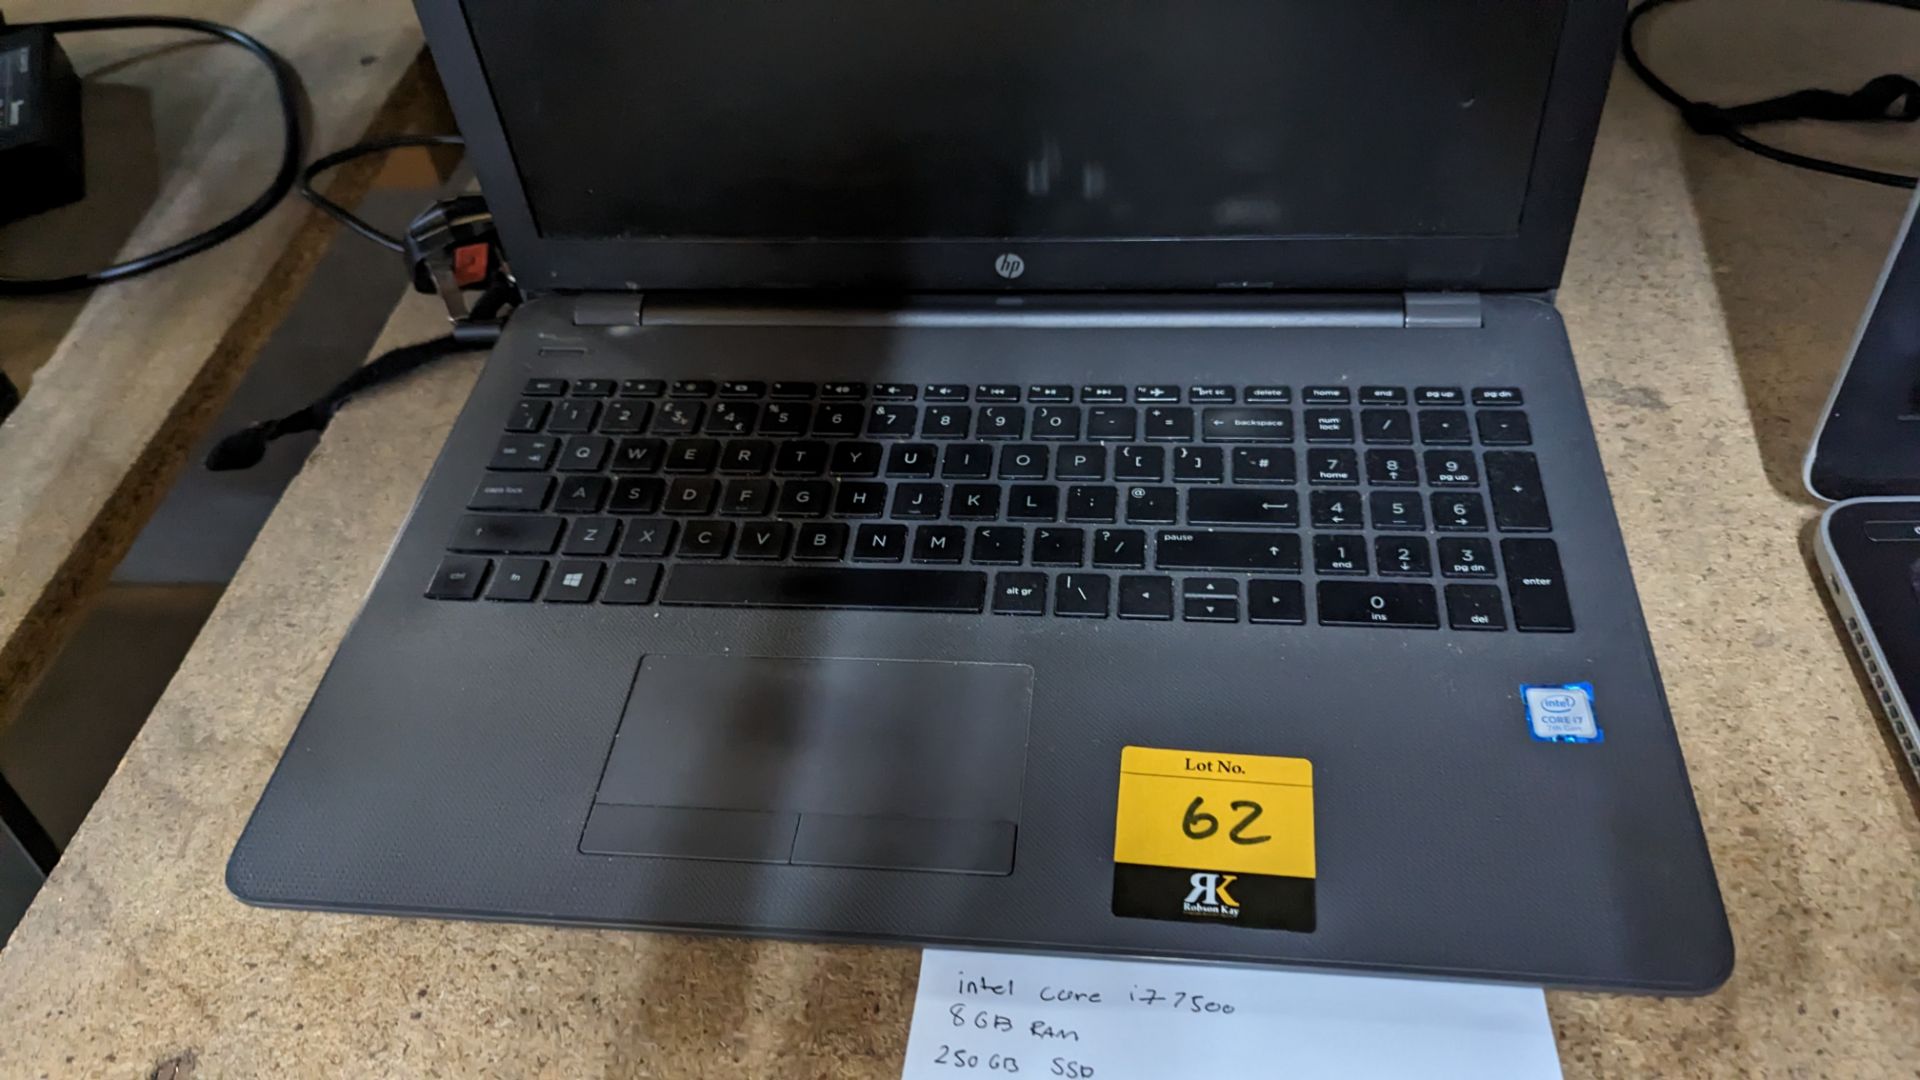 HP 250 notebook computer with Core i7-7500 CPU, 8GB RAM, 250 GB SSD, including power pack/charger - Image 6 of 12